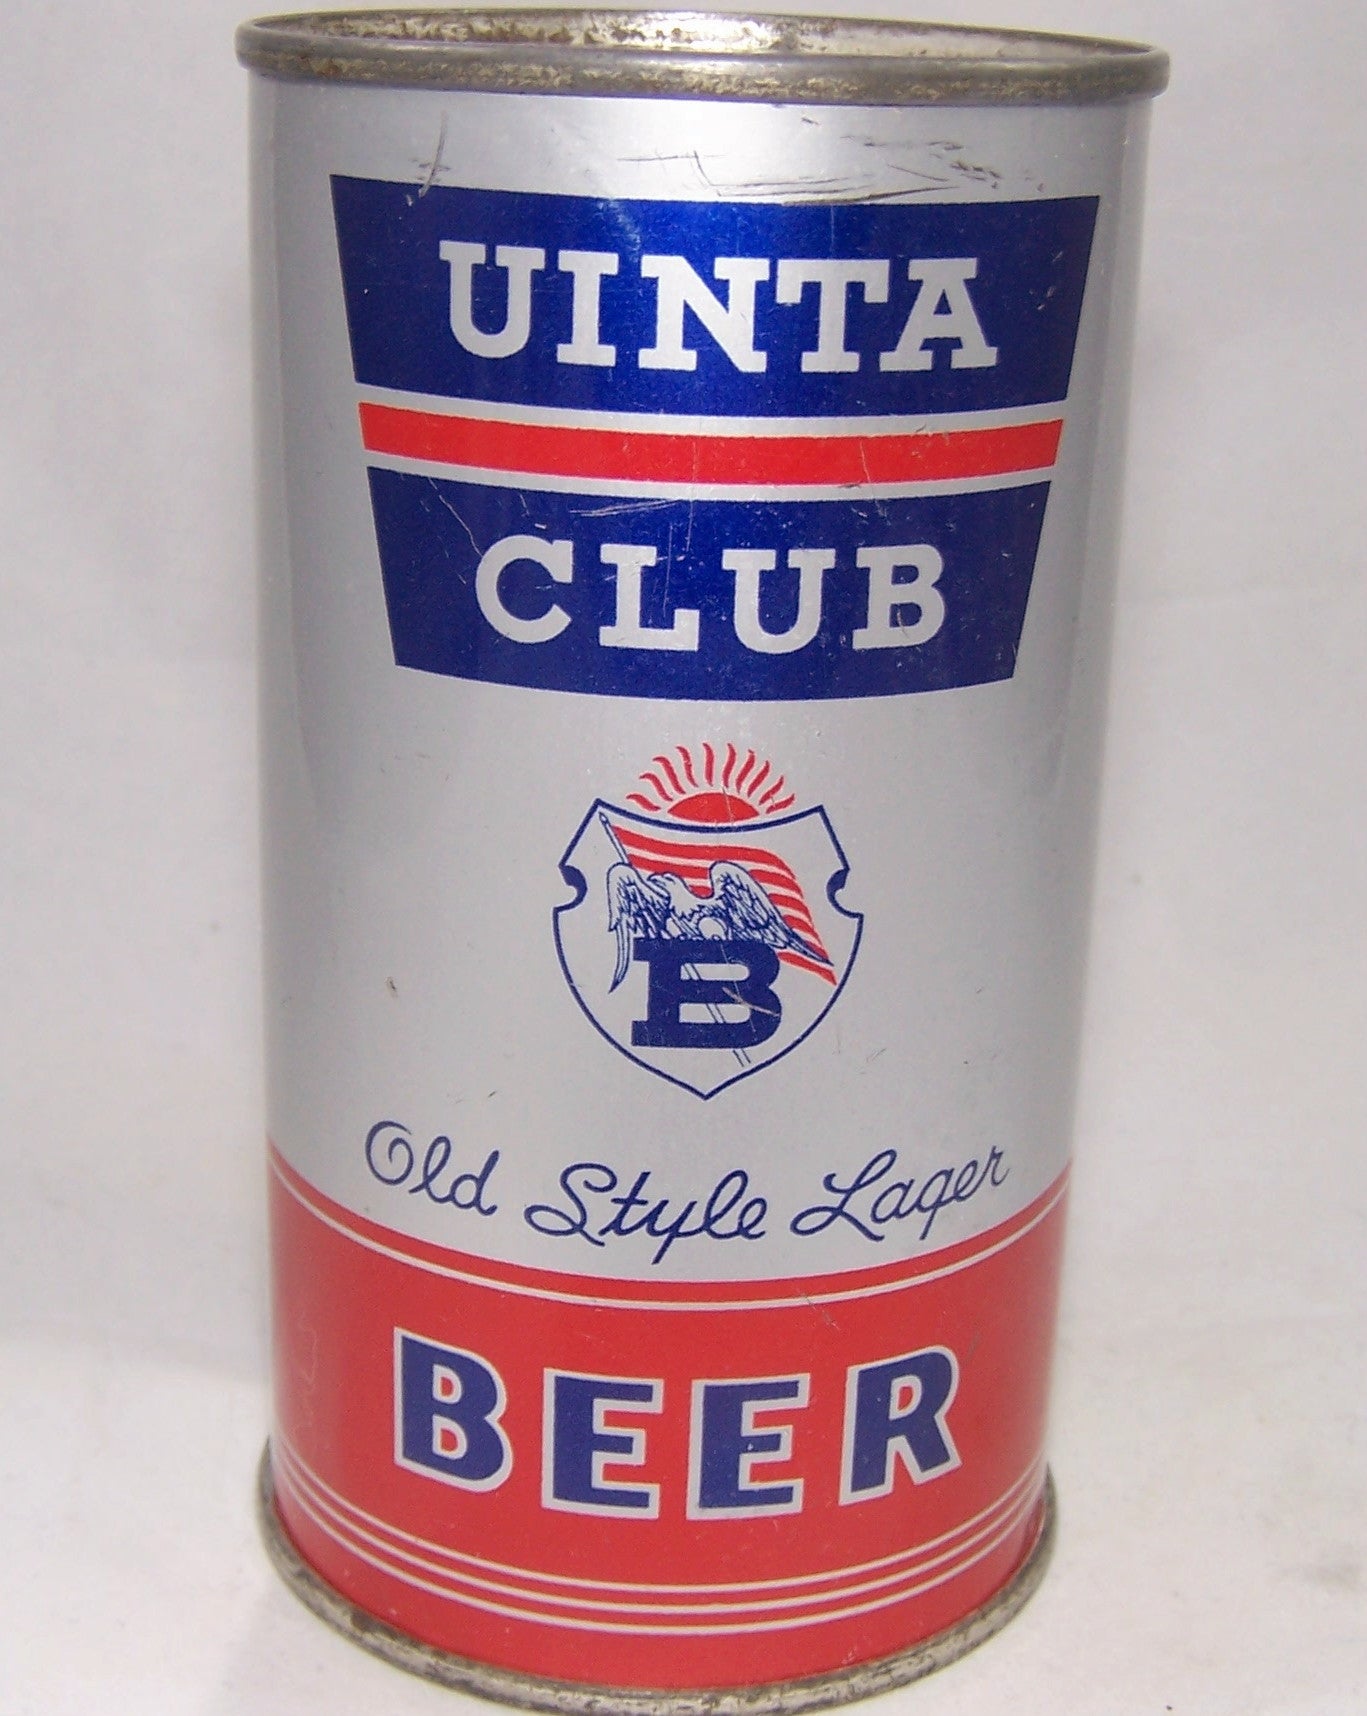 Uinta Club Old Style Lager Beer, Lilek # 819, Grade 1 Sold on 10/25/16